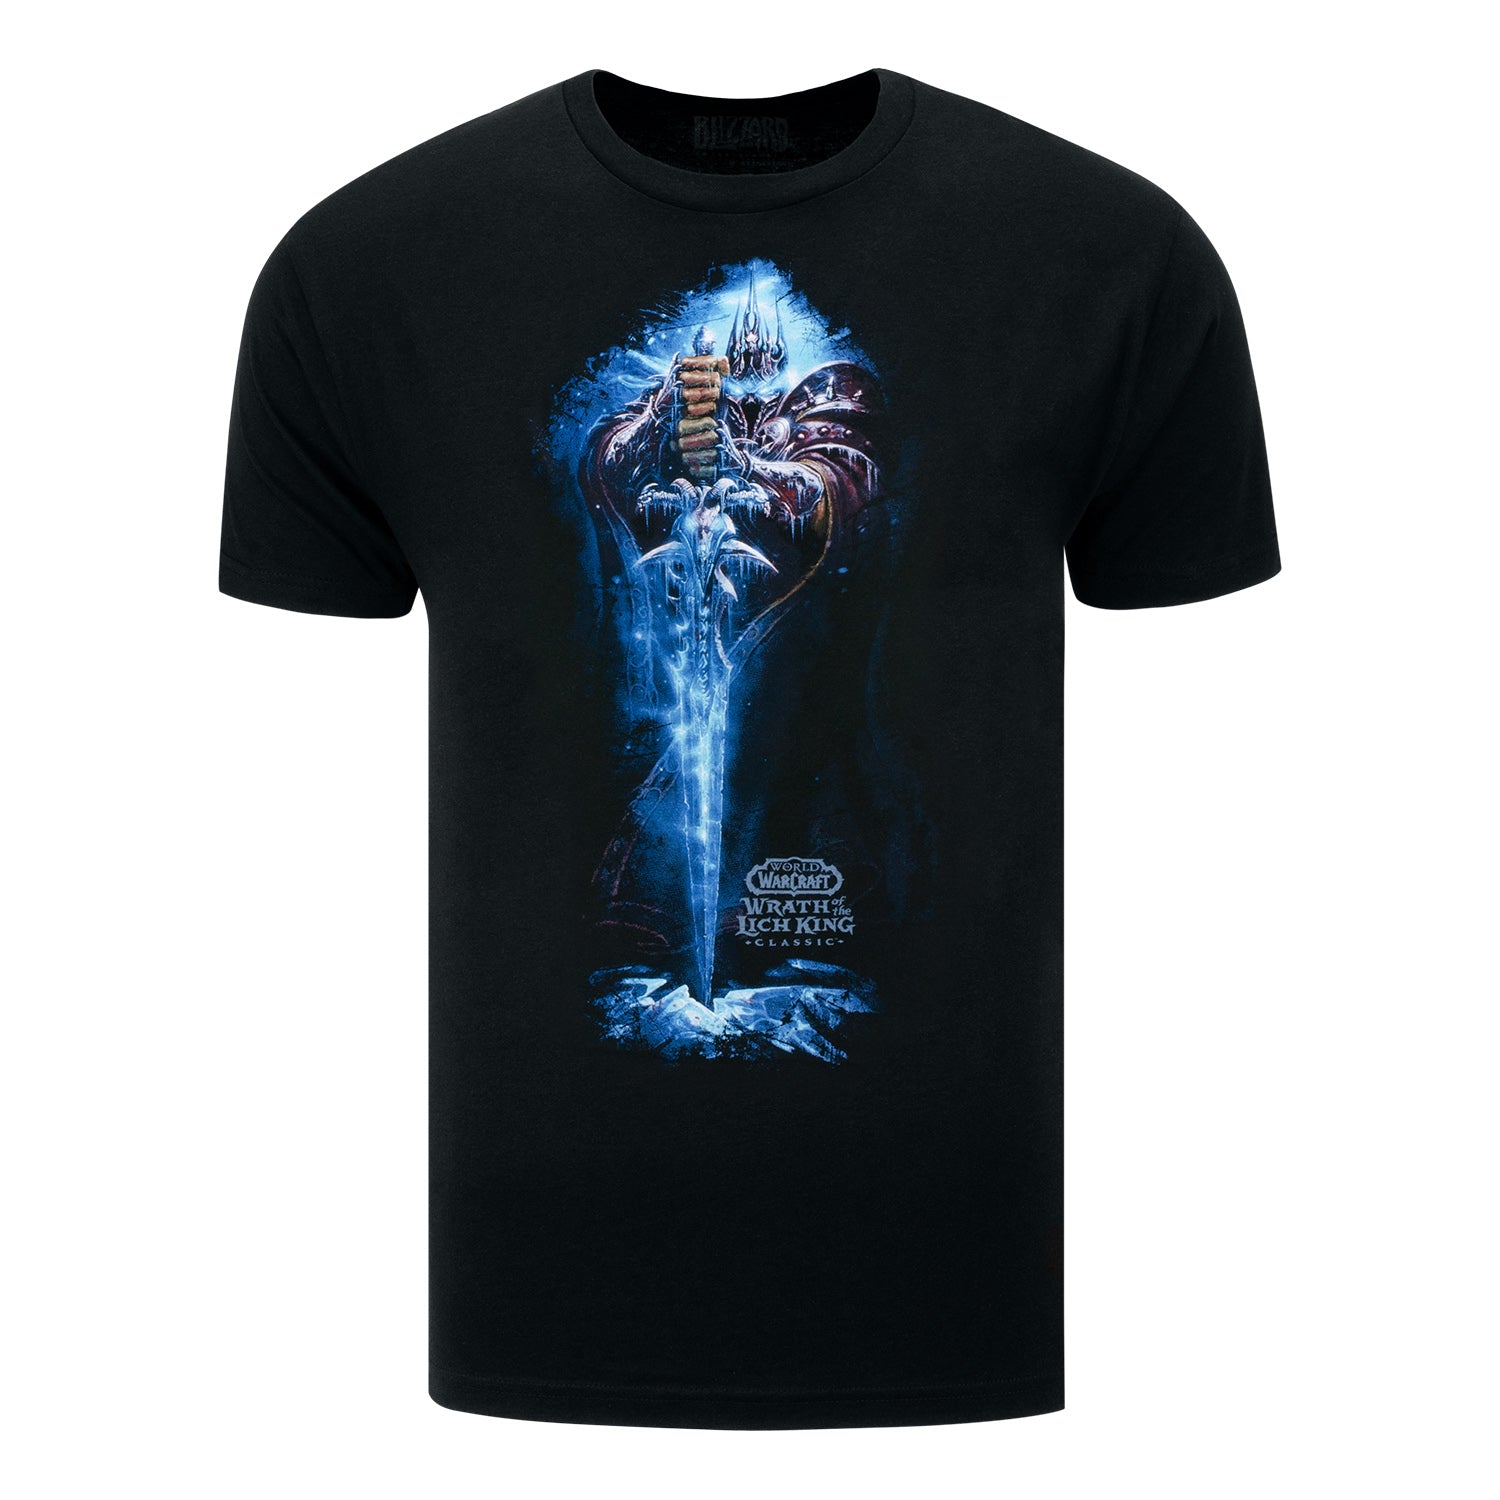 World of Warcraft Lich King J!NX Black Frostmourne T-Shirt - Front View with Frostmourne Design and World of Warcraft Logo